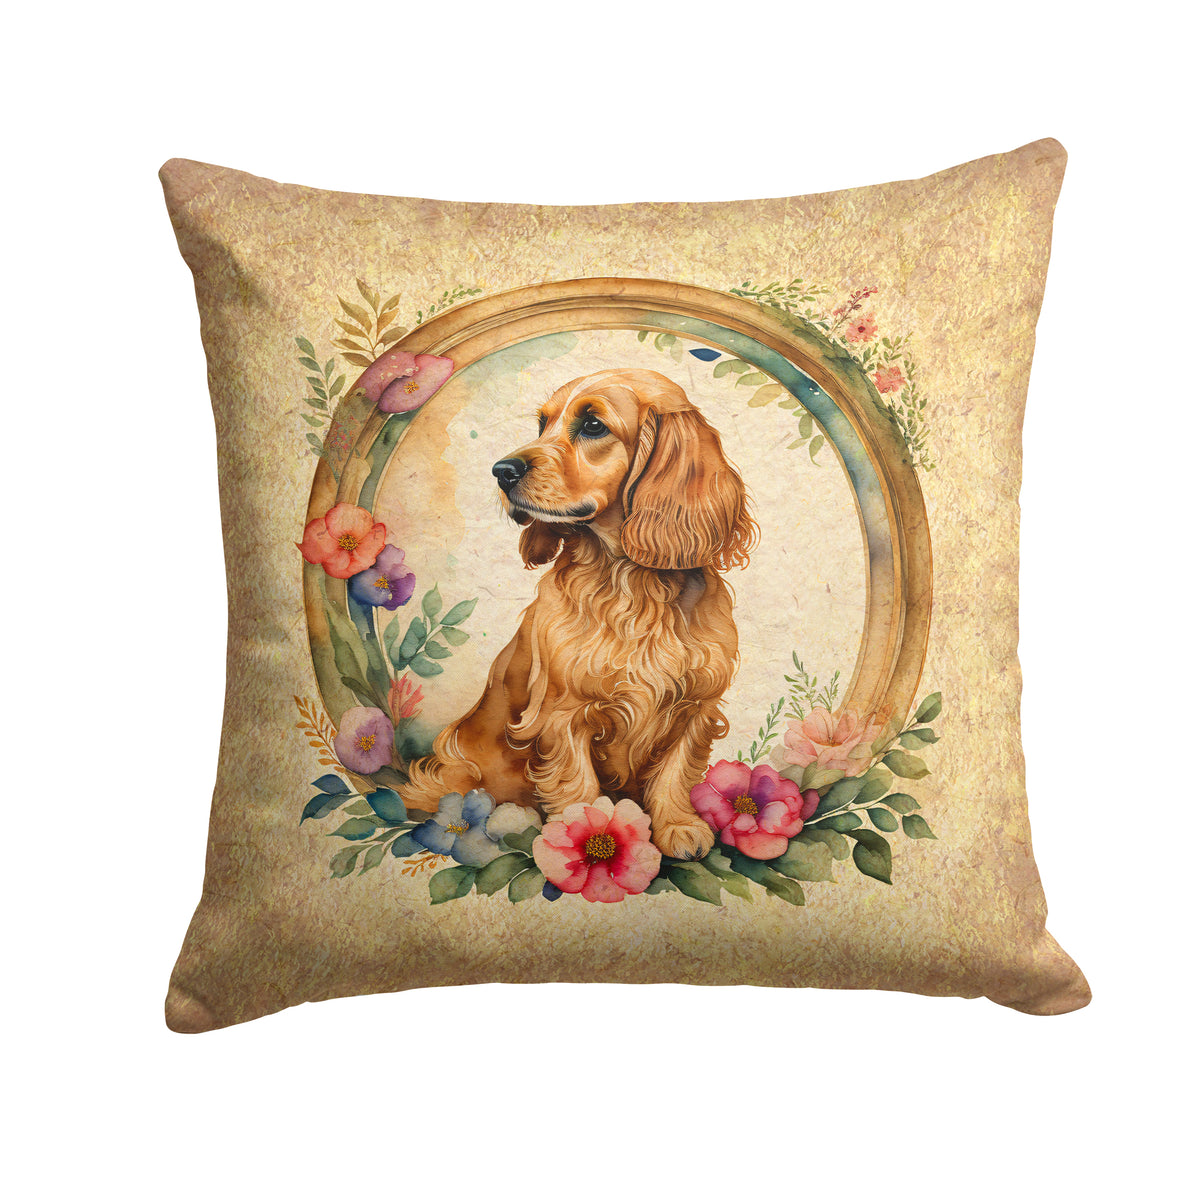 Buy this English Cocker Spaniel and Flowers Fabric Decorative Pillow